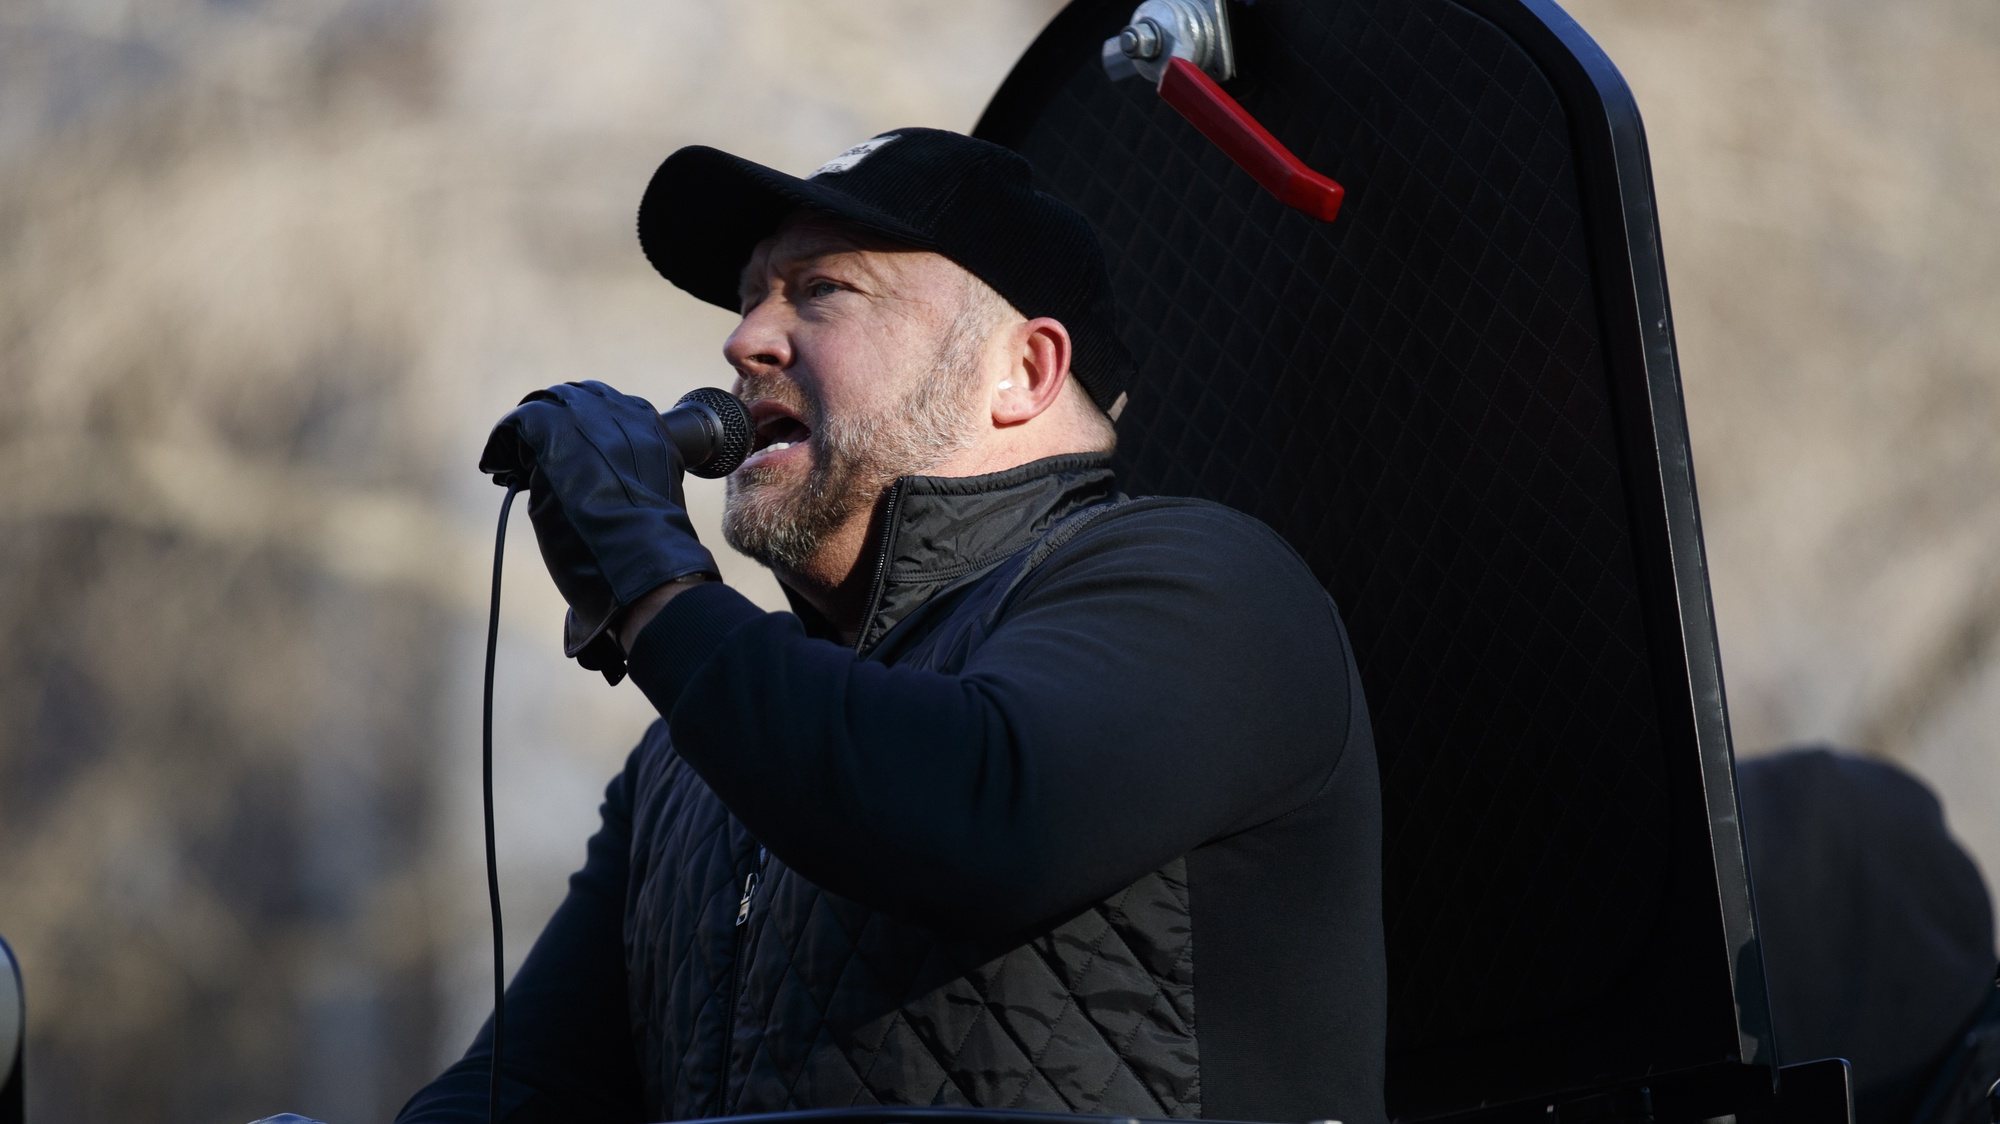 epa10240361 (FILE) - Right-wing media personality Alex Jones of InfoWars delivers remarks to gun-rights supporters gathered for a rally outside the Virginia state capitol in Richmond, Virginia, USA, 20 January 2020 (reissued 13 October 2022). A Connecticut jury on 12 October 2022 said that Alex Jones has to pay 965 million US dollars in damages for claims that the 2012 Sandy Hook massacre was staged by the US government.  EPA/SHAWN THEW *** Local Caption *** 55785260